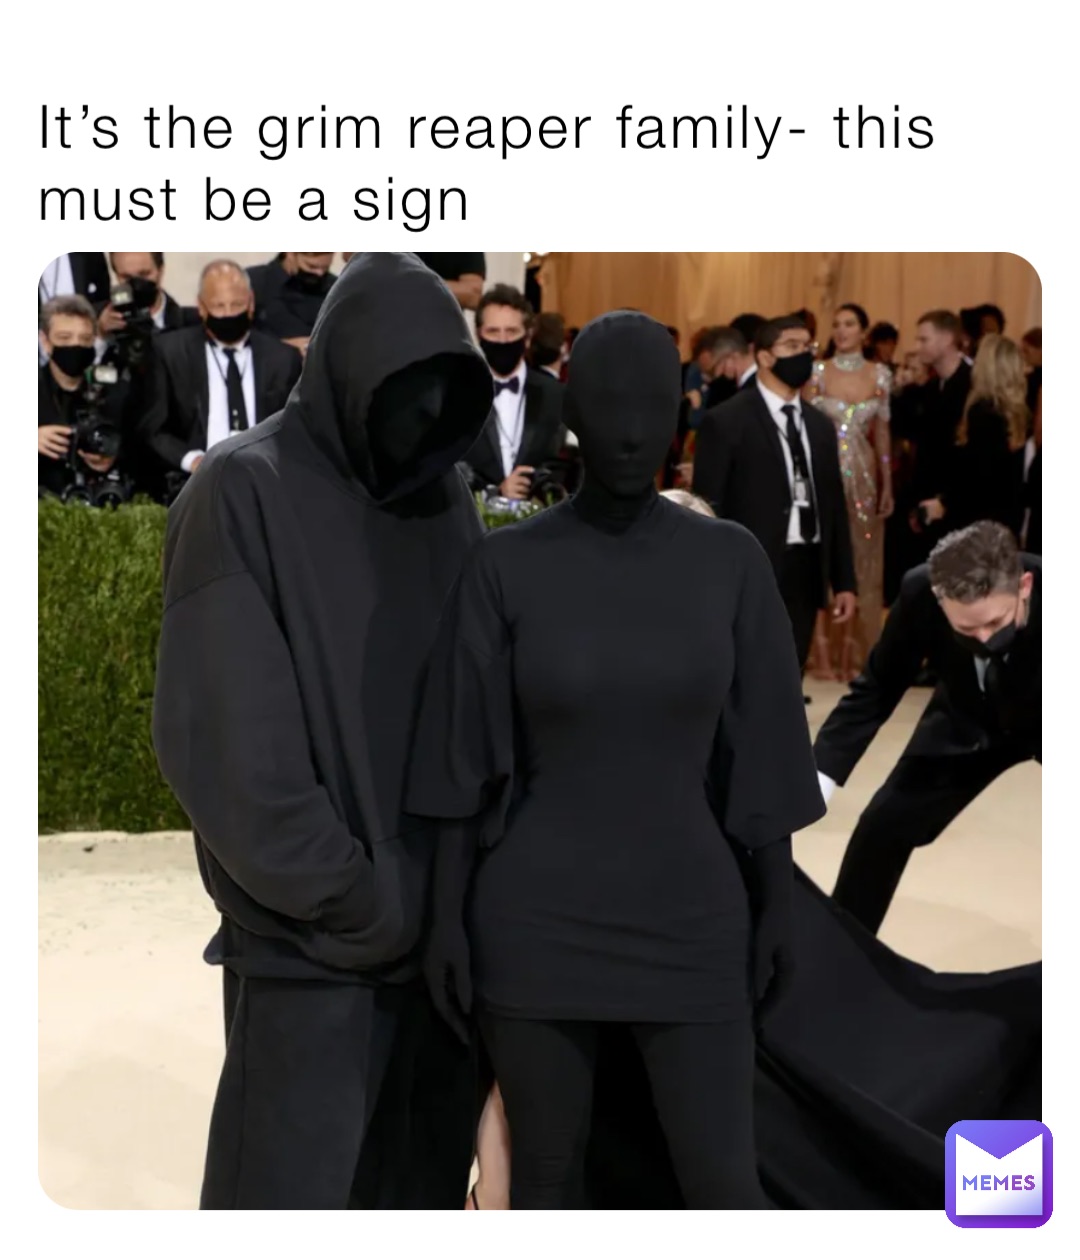 It's the grim reaper family- this must be a sign | @Niathings | Memes